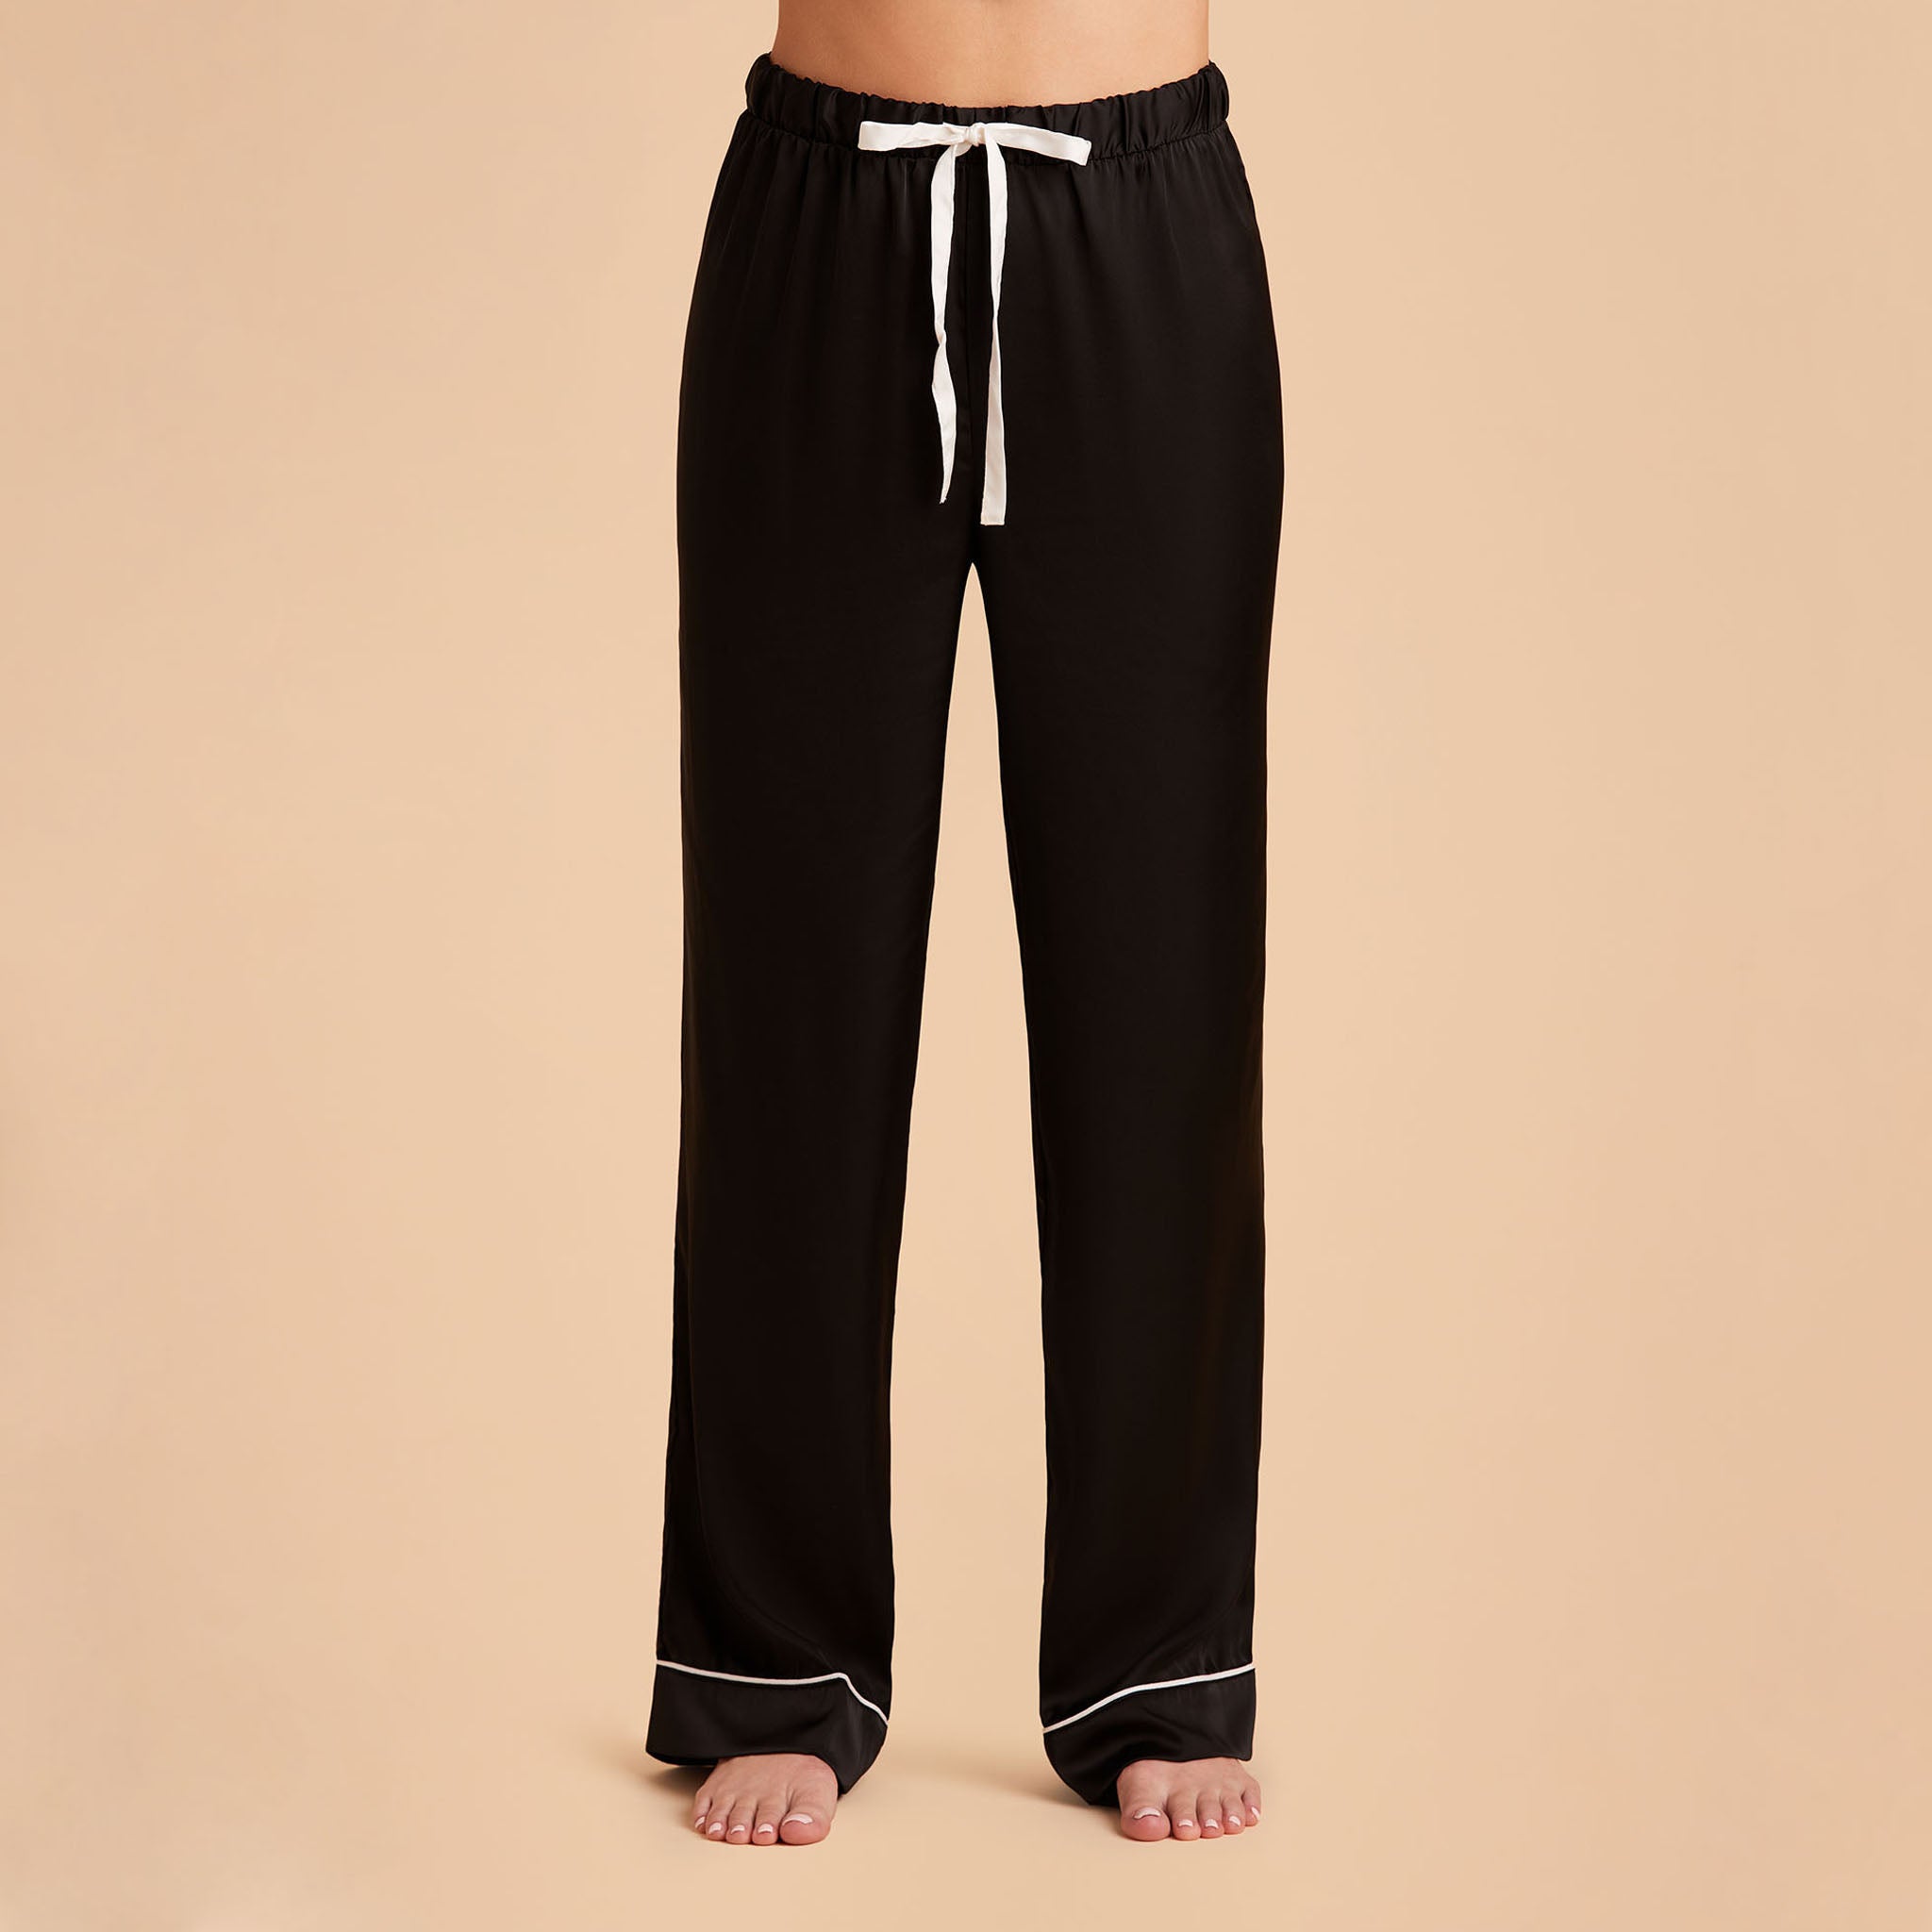 Jonny Satin Pants Bridesmaid Pajamas With White Piping in black, front view